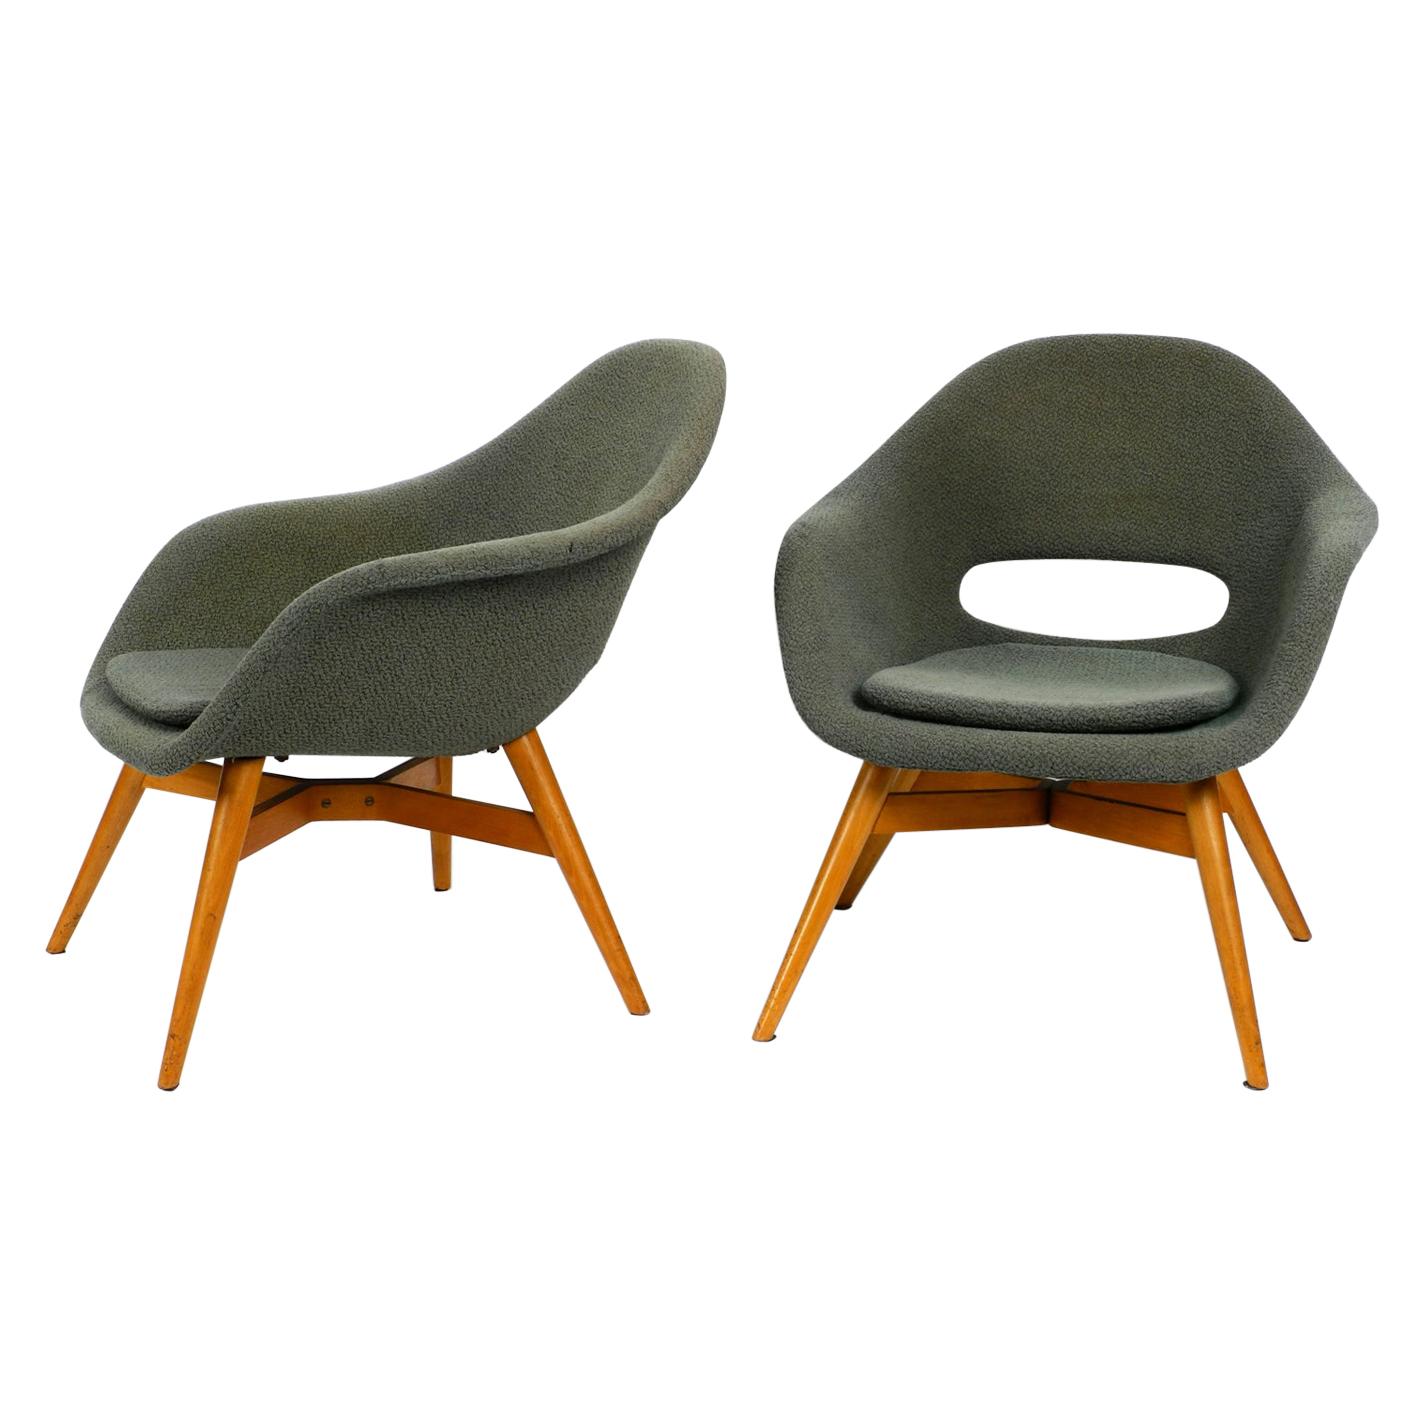 Two Lounge Chairs Miroslav Navratil with Fiberglass Shell and Original Cover